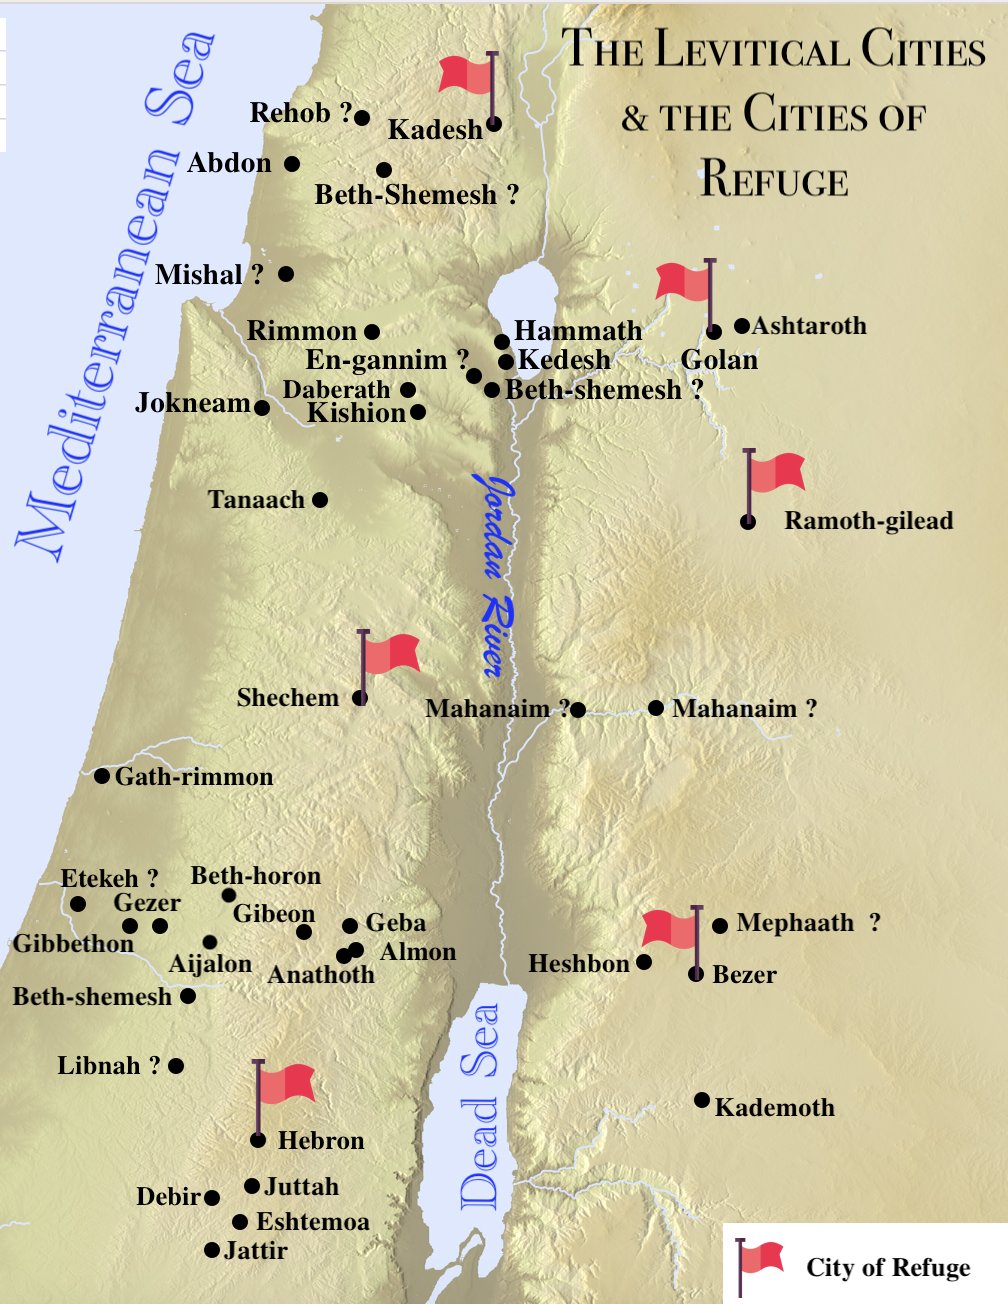 Map of Levitical cities and the Cities of Refuge spread throughout all of Israel.